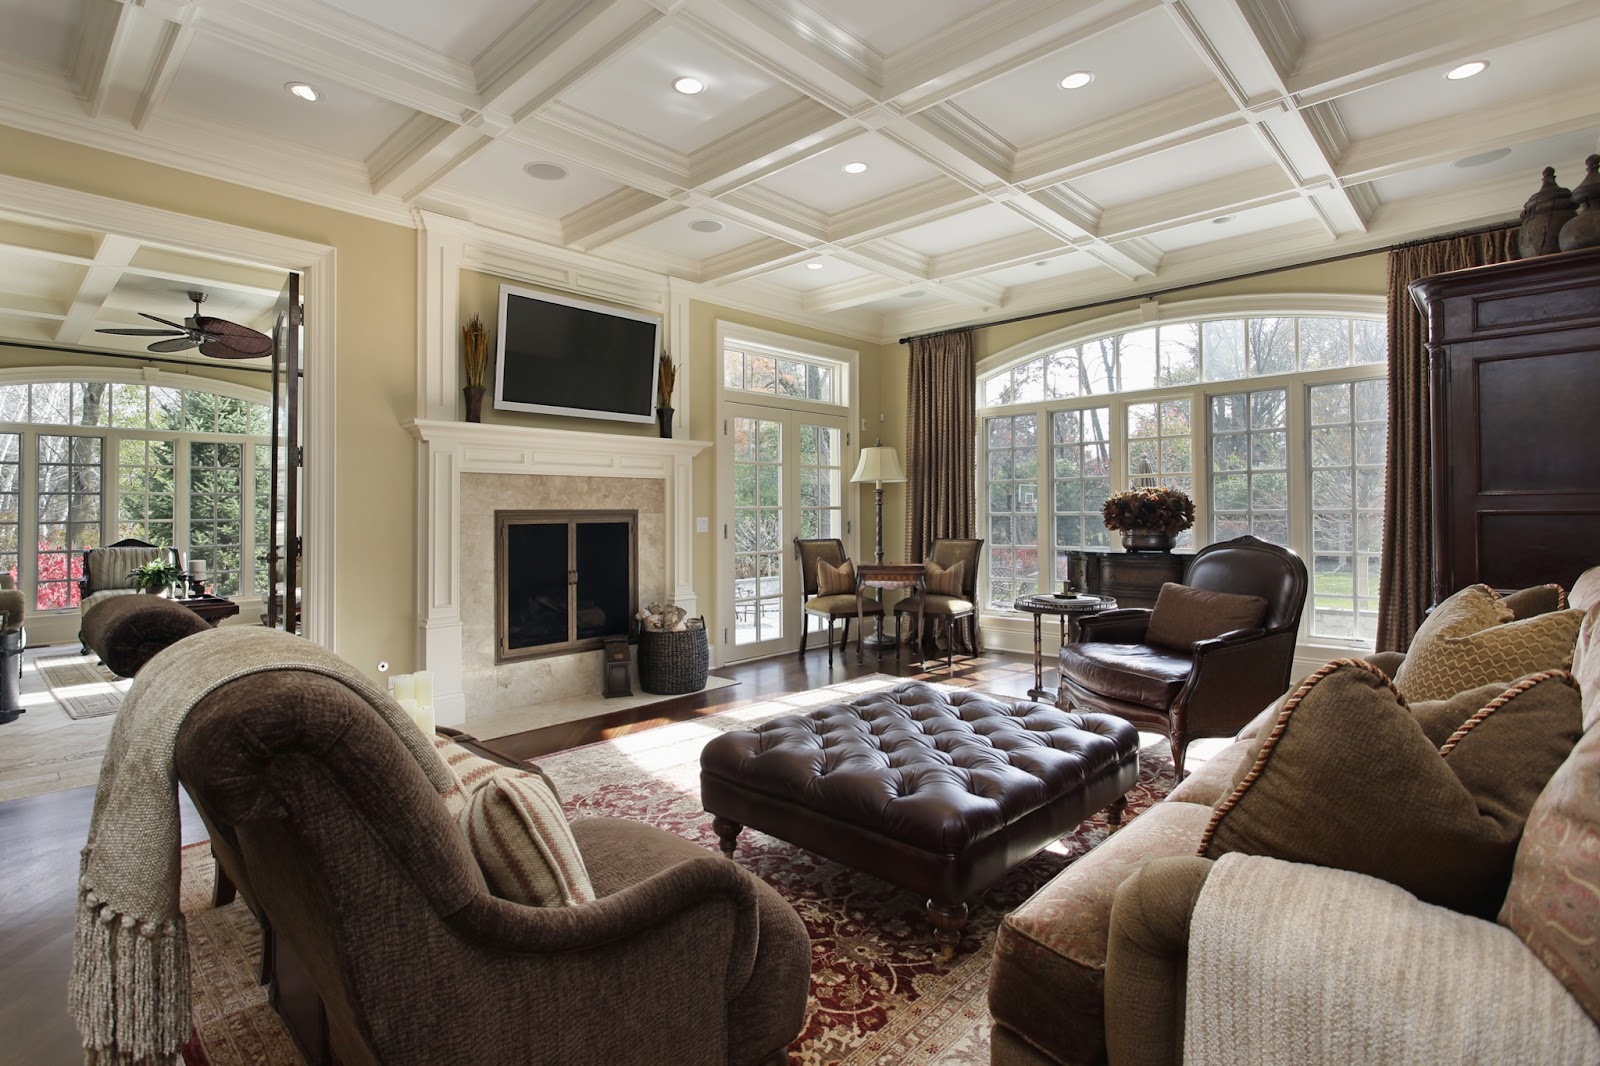 Traditional living room with warm woods, leather accents, large floor to ceiling windows & drapes , coffered ceiling, marble surround and wood fireplace.